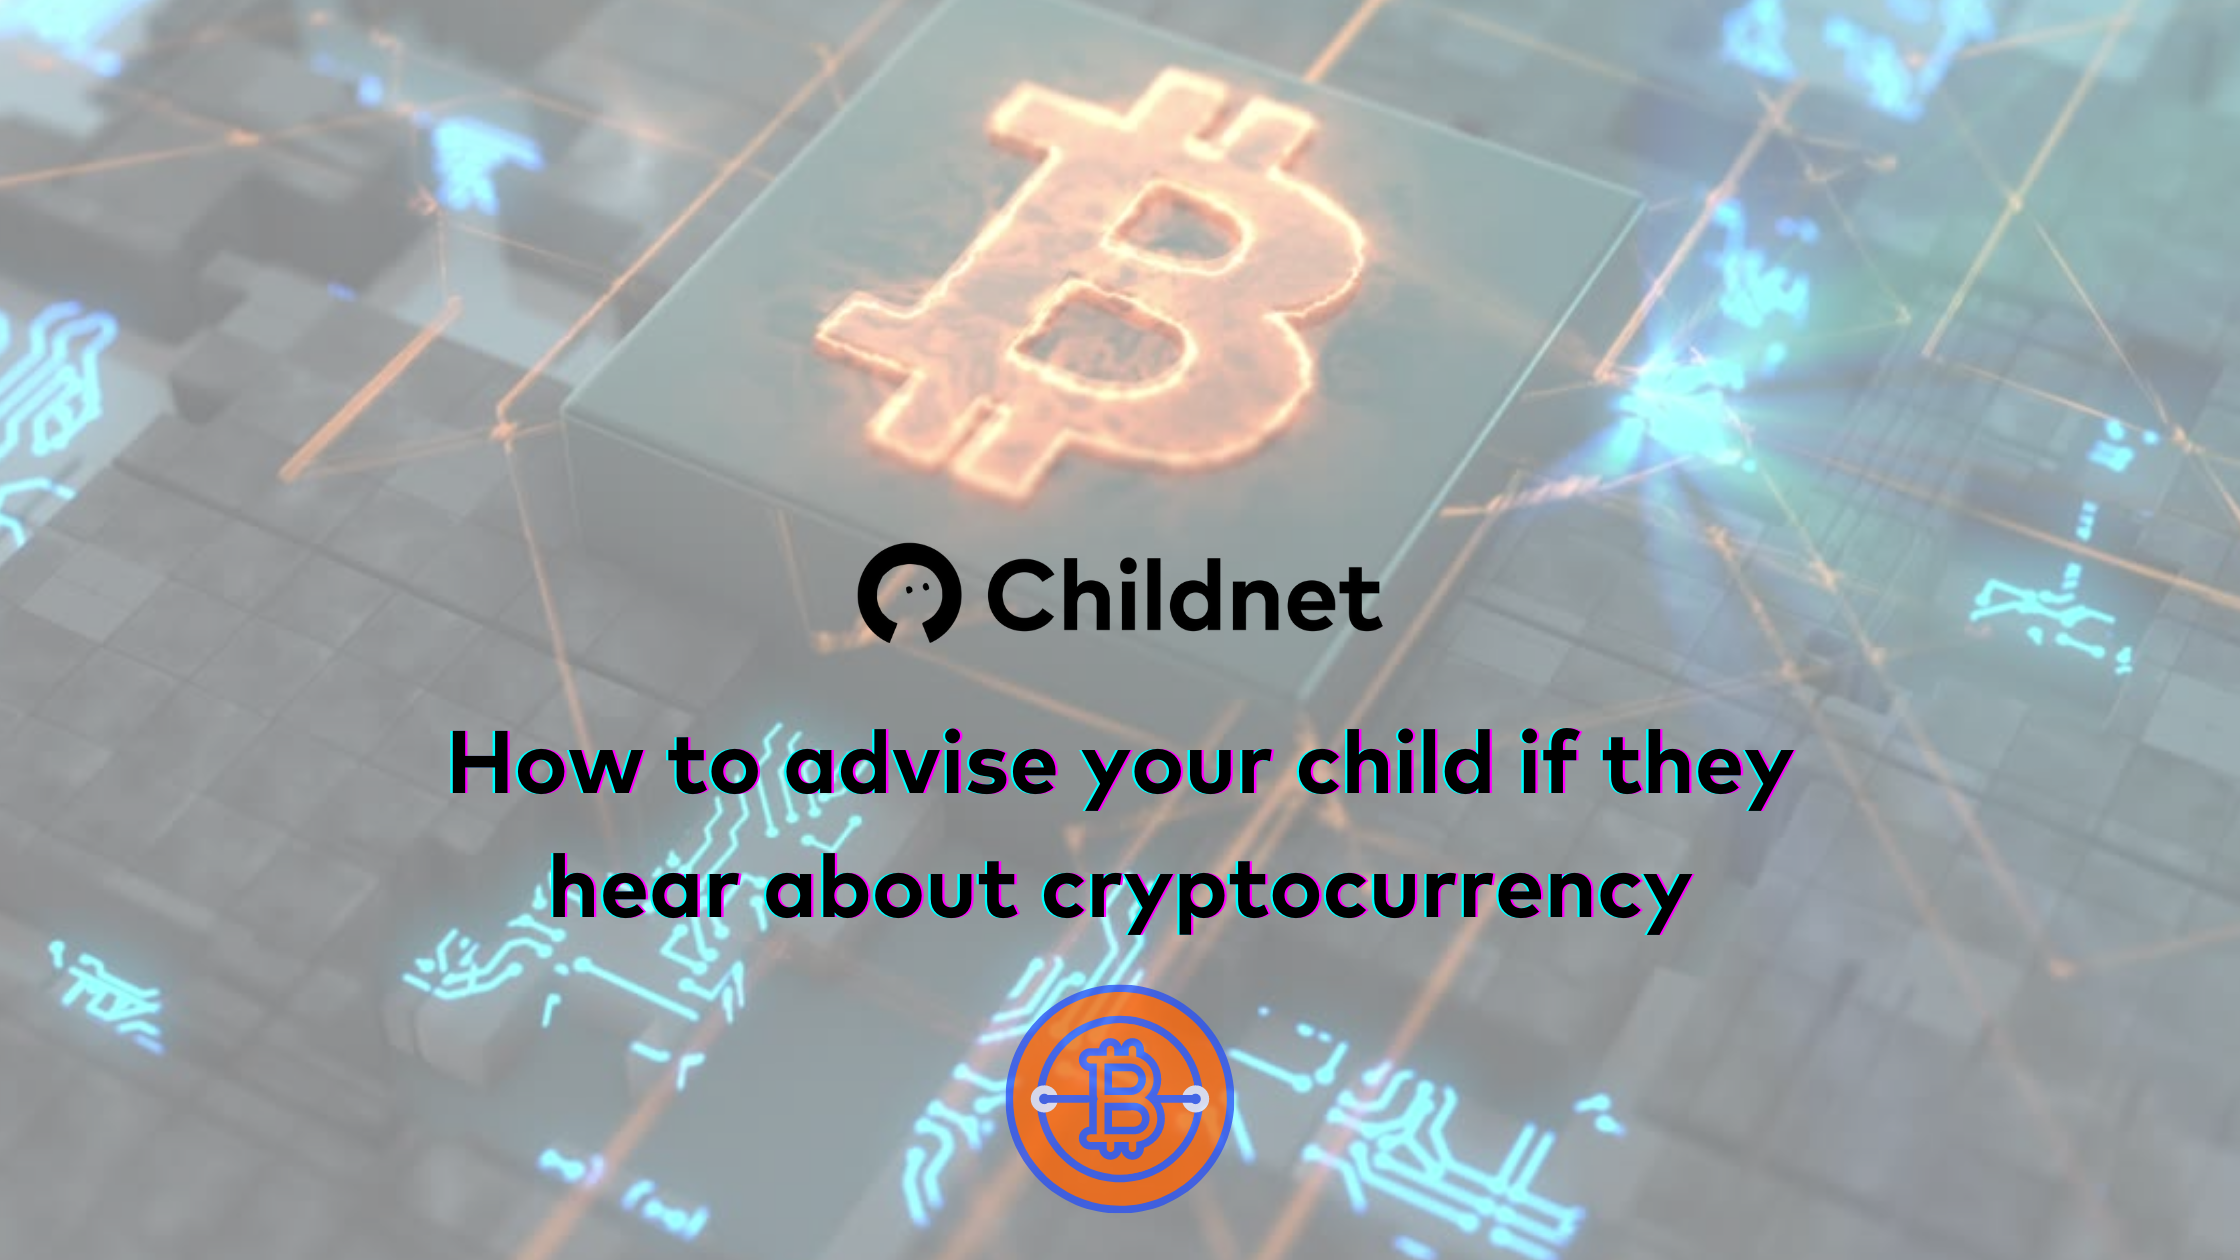 can i open a crypto account for my child